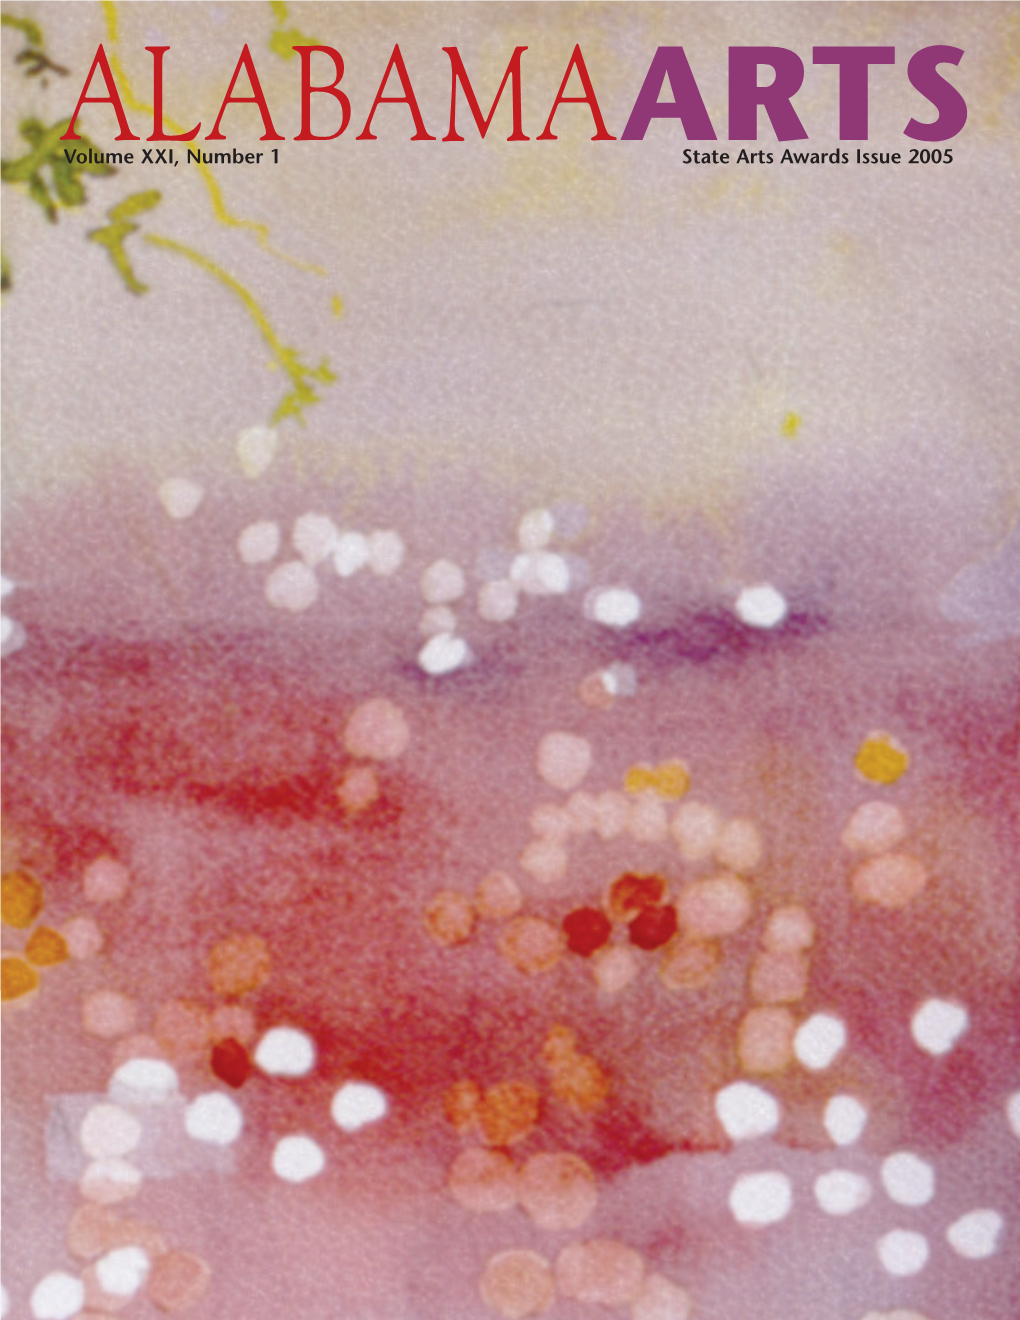 Volume XXI, Number 1 State Arts Awards Issue 2005